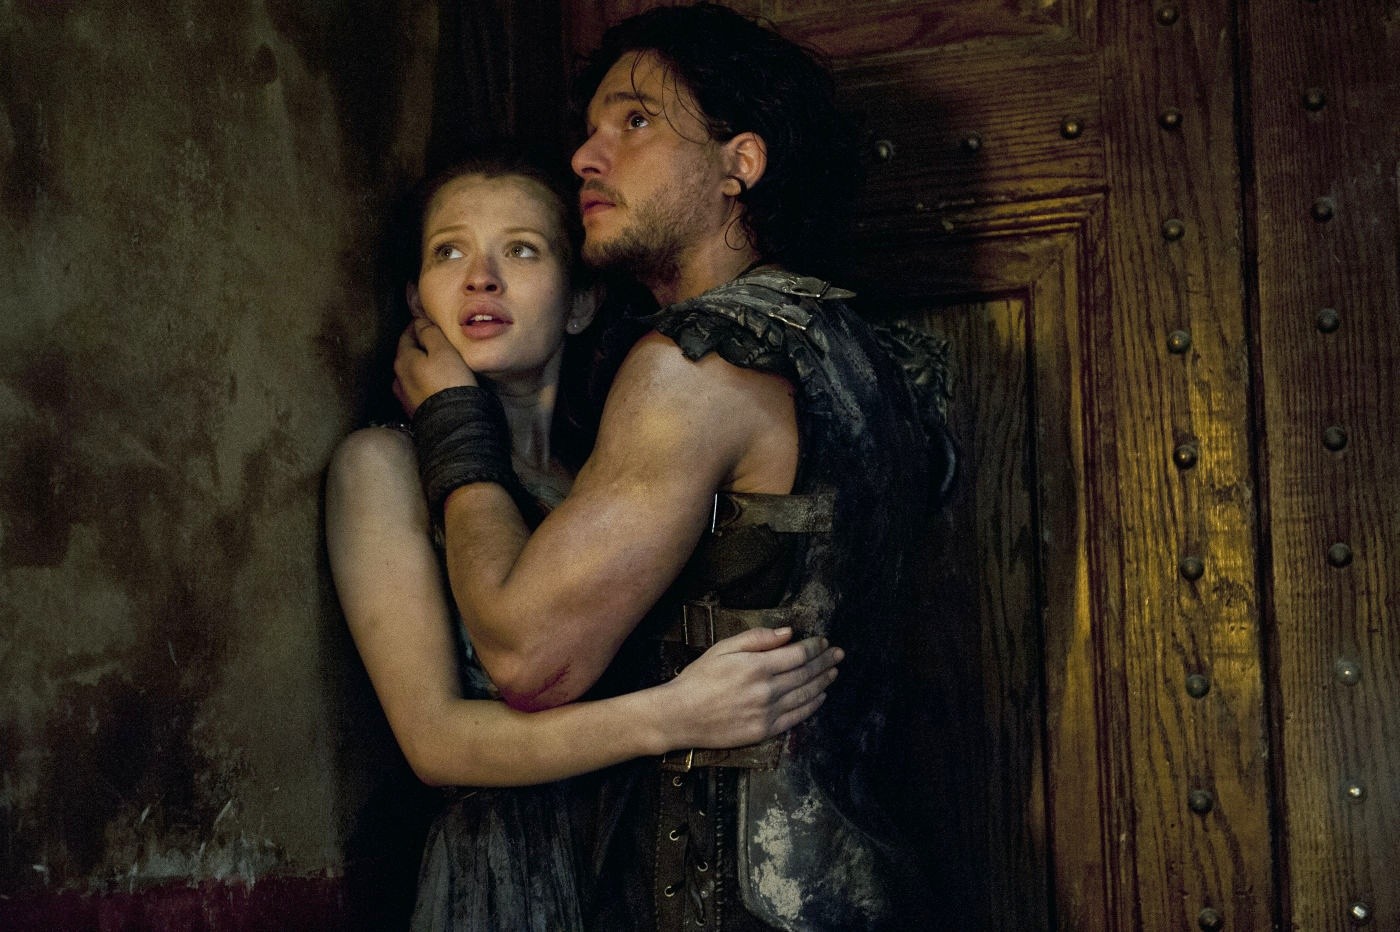 Emily Browning stars as Cassia and Kit Harington stars as Milo in TriStar Pictures' Pompeii (2014)